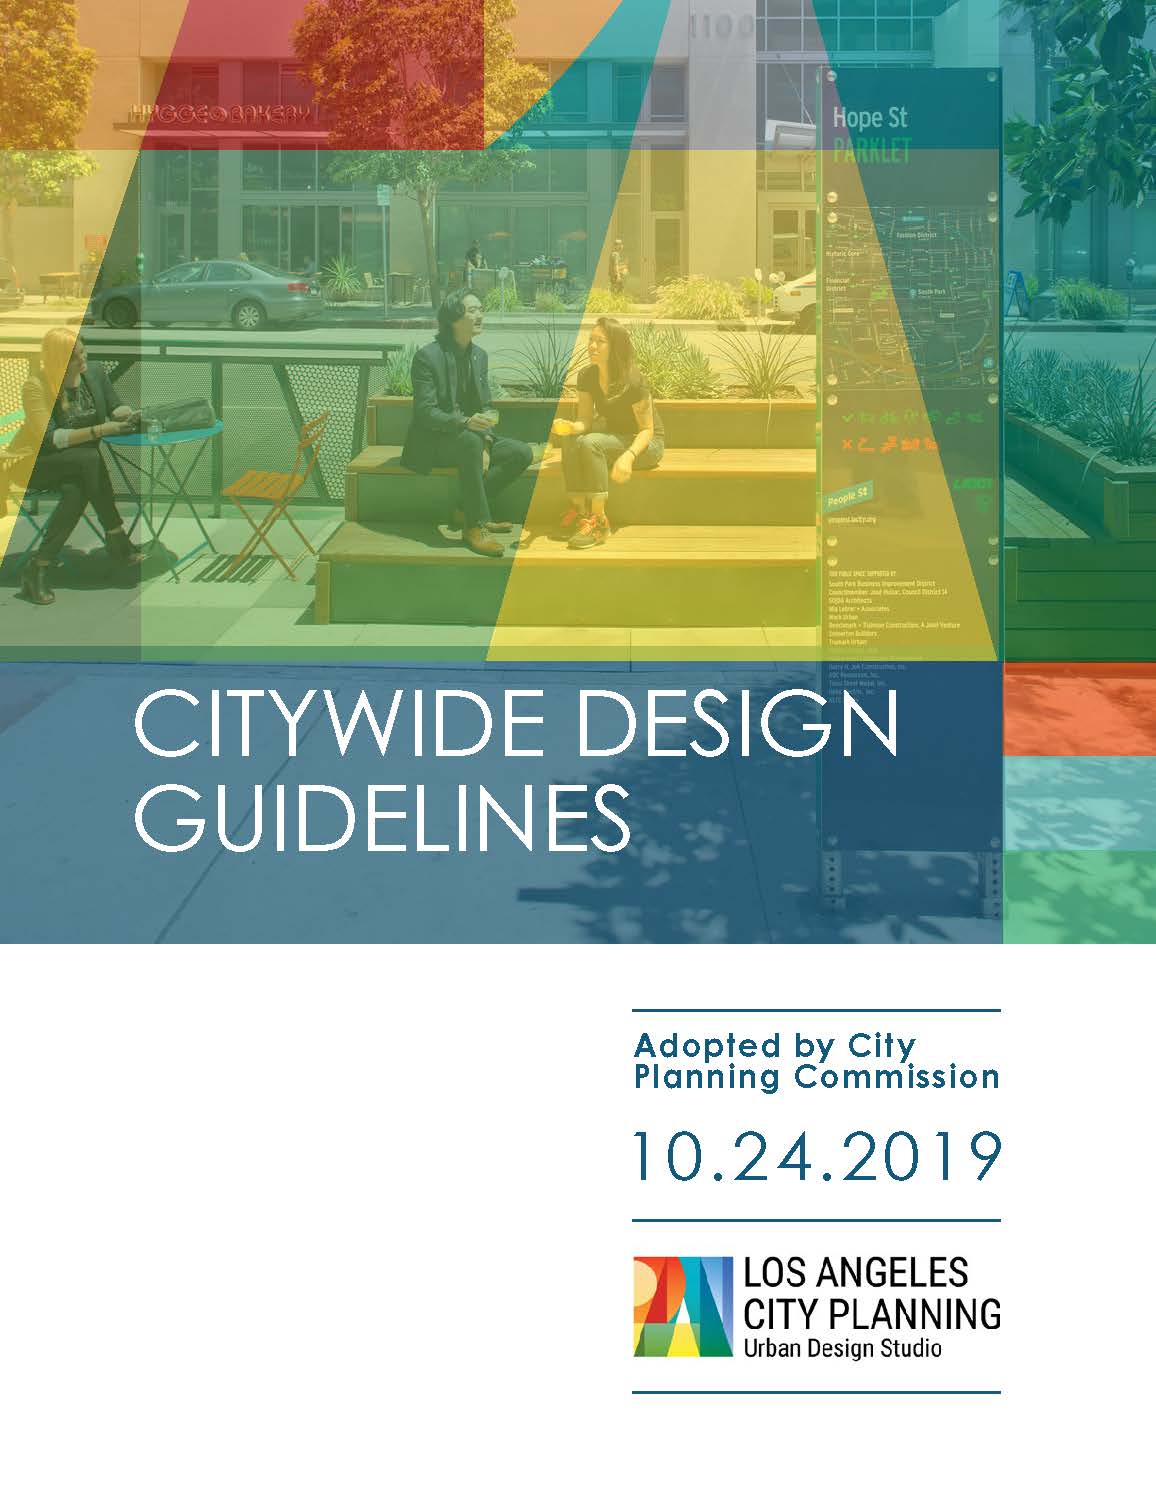 Citywide Design Guidelines